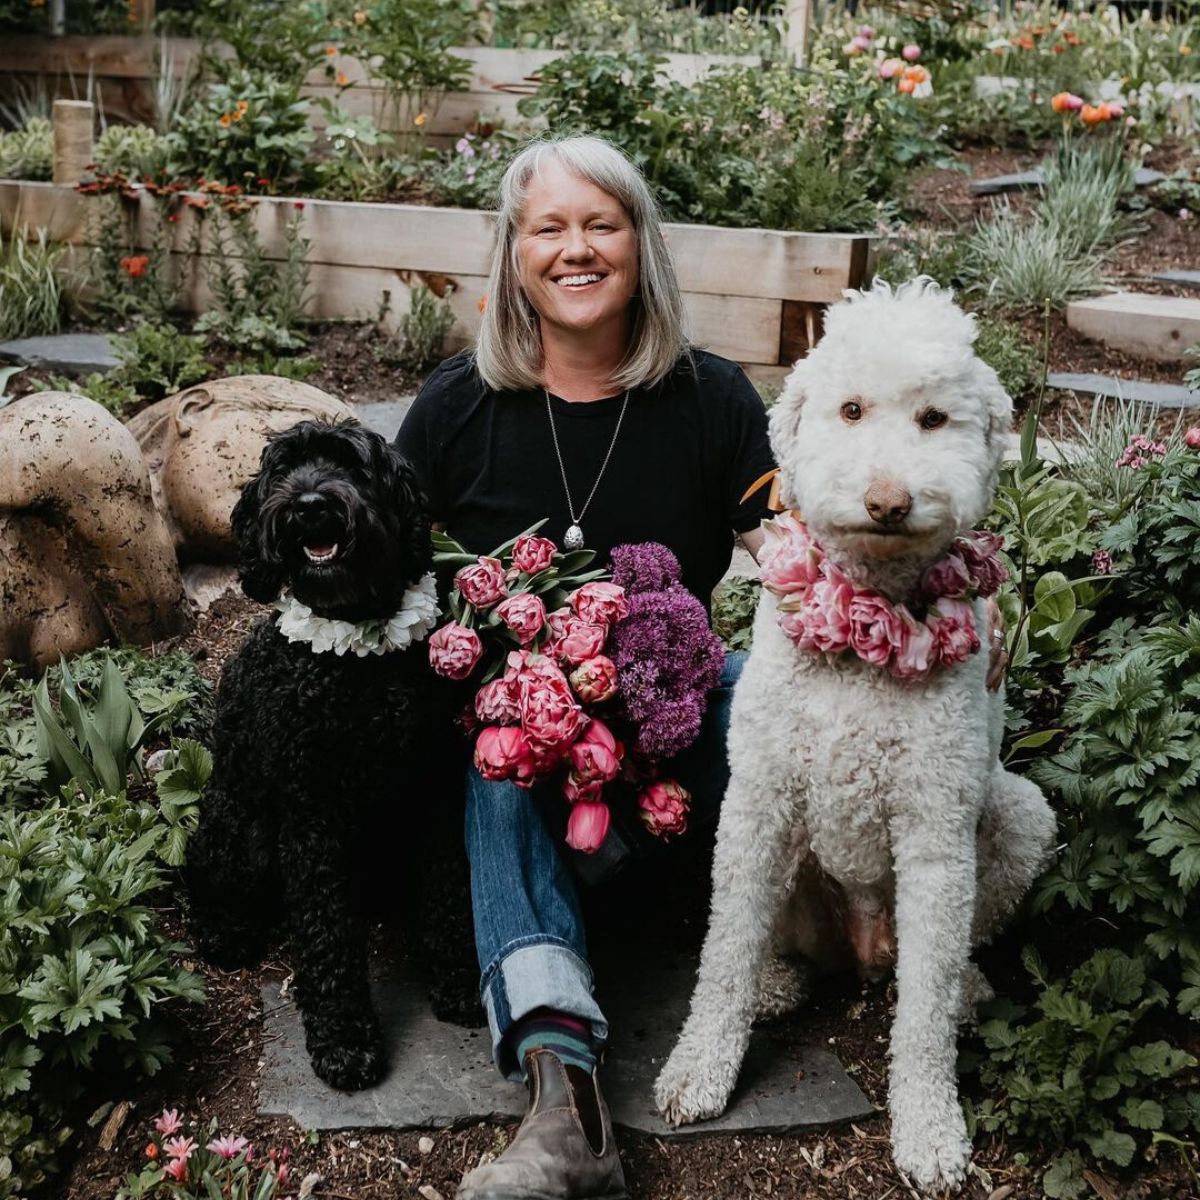 Becky Feasby is the owner of Prairie Girl Flowers